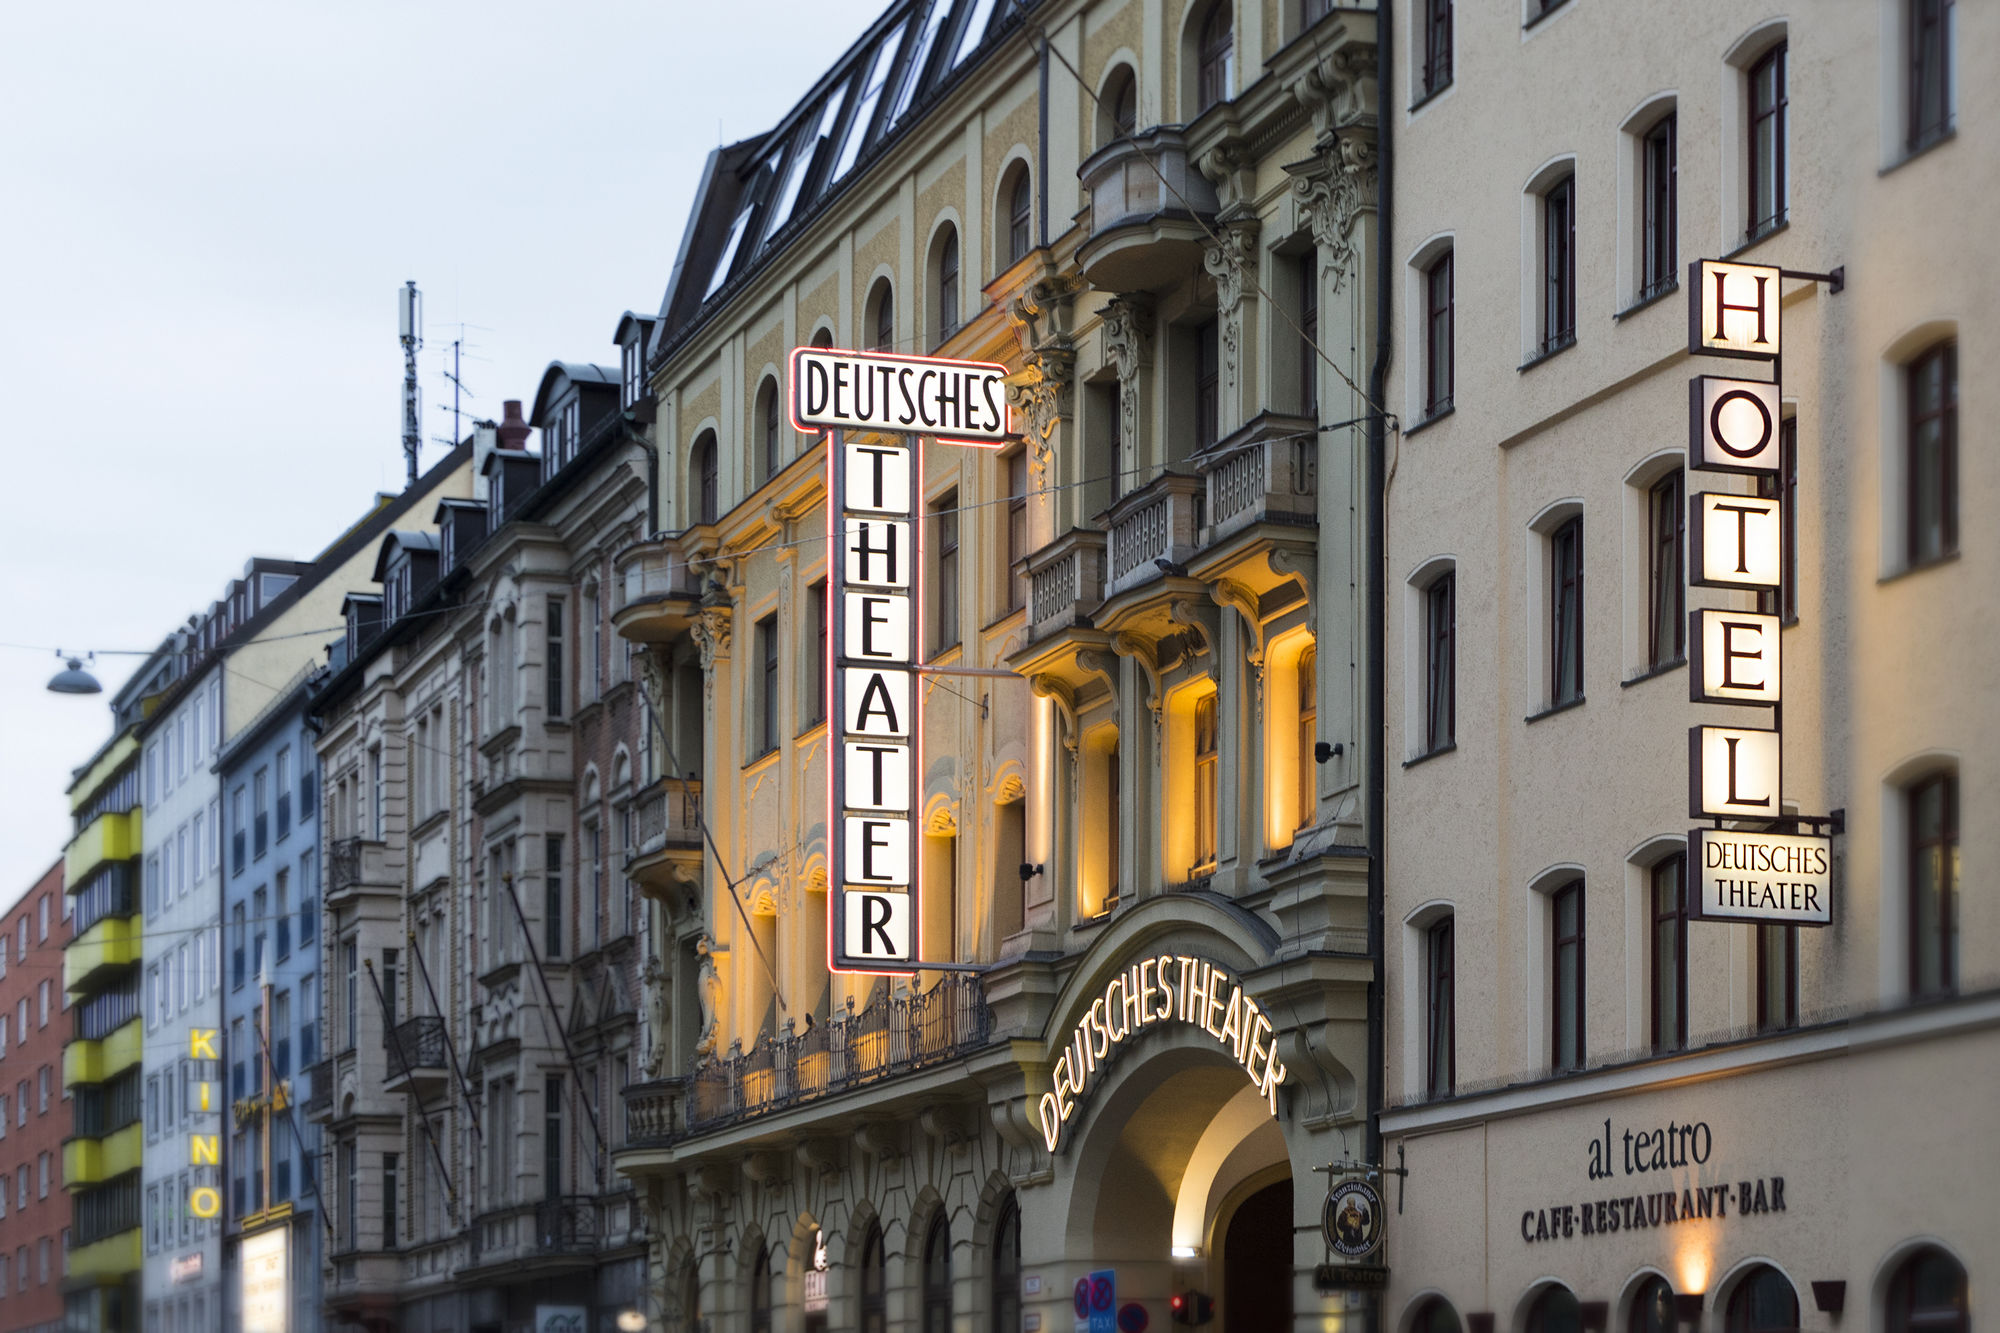 Hotel Deutsches Theater Downtown <br/>46.67 ew <br/> <a href='http://vakantieoplossing.nl/outpage/?id=cccbc35a99f207db7921509c56e67c18' target='_blank'>View Details</a>